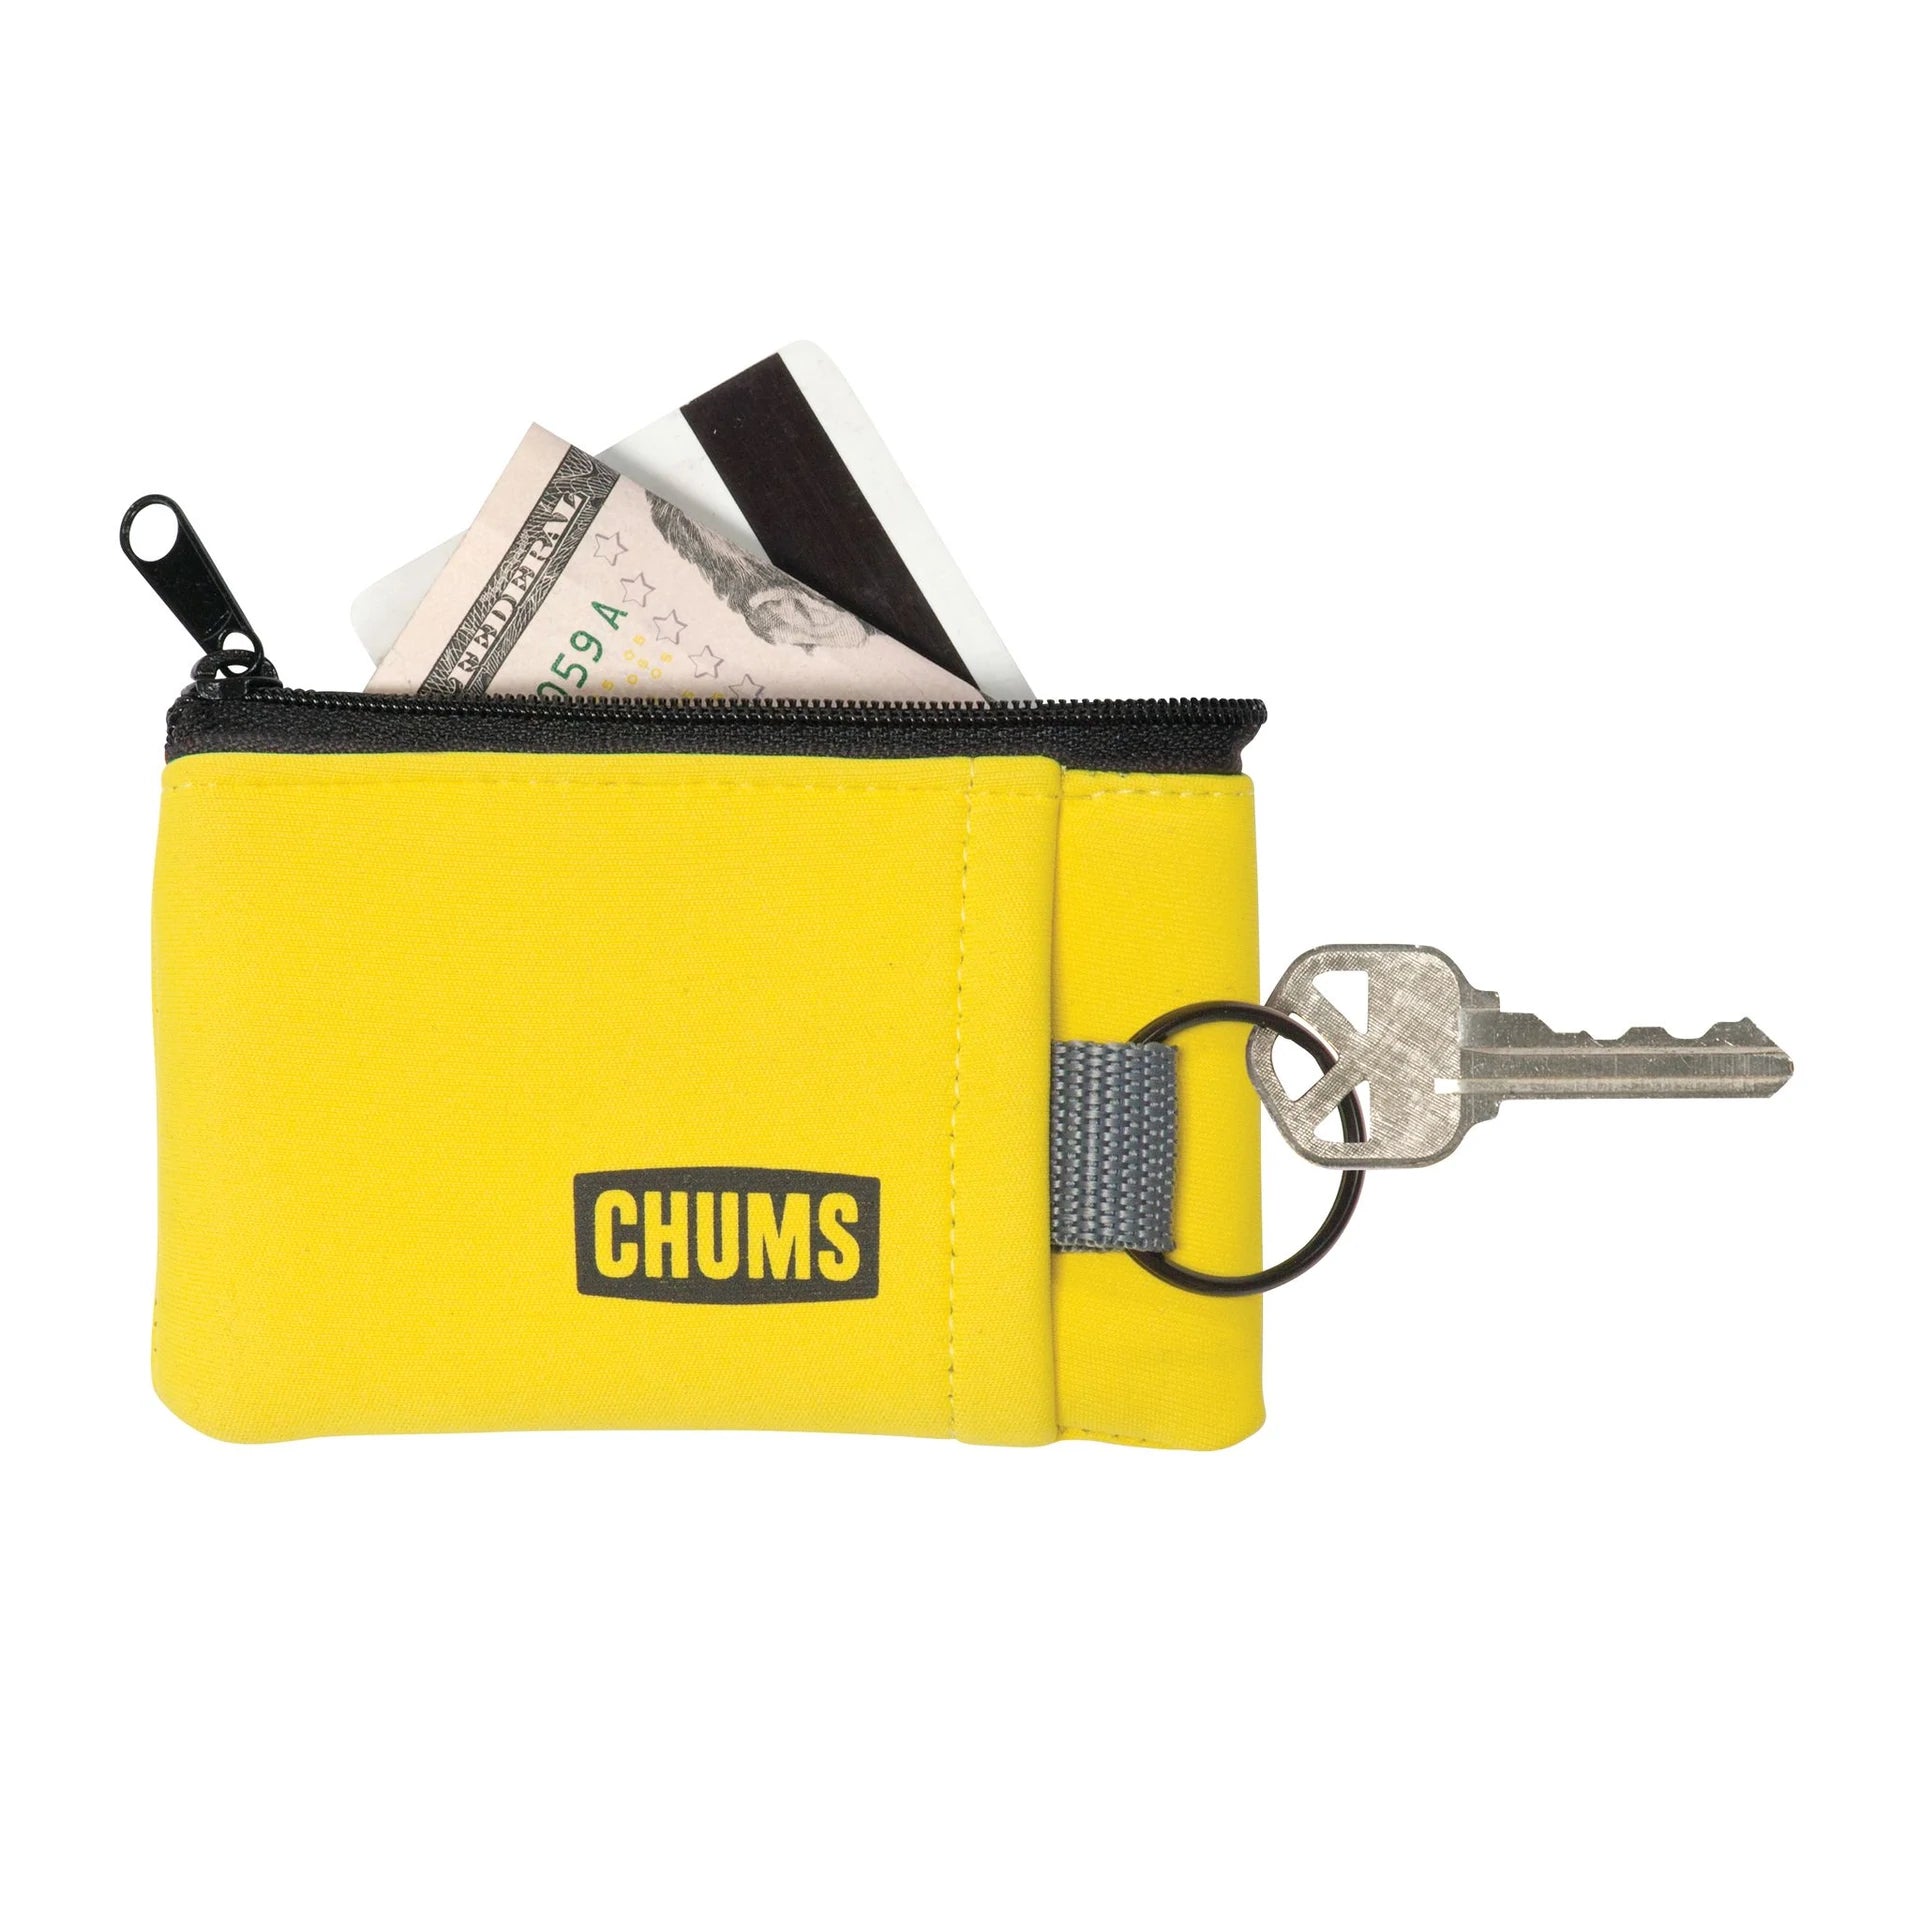 CHUMS FLOATING MARSUPIAL WALLET